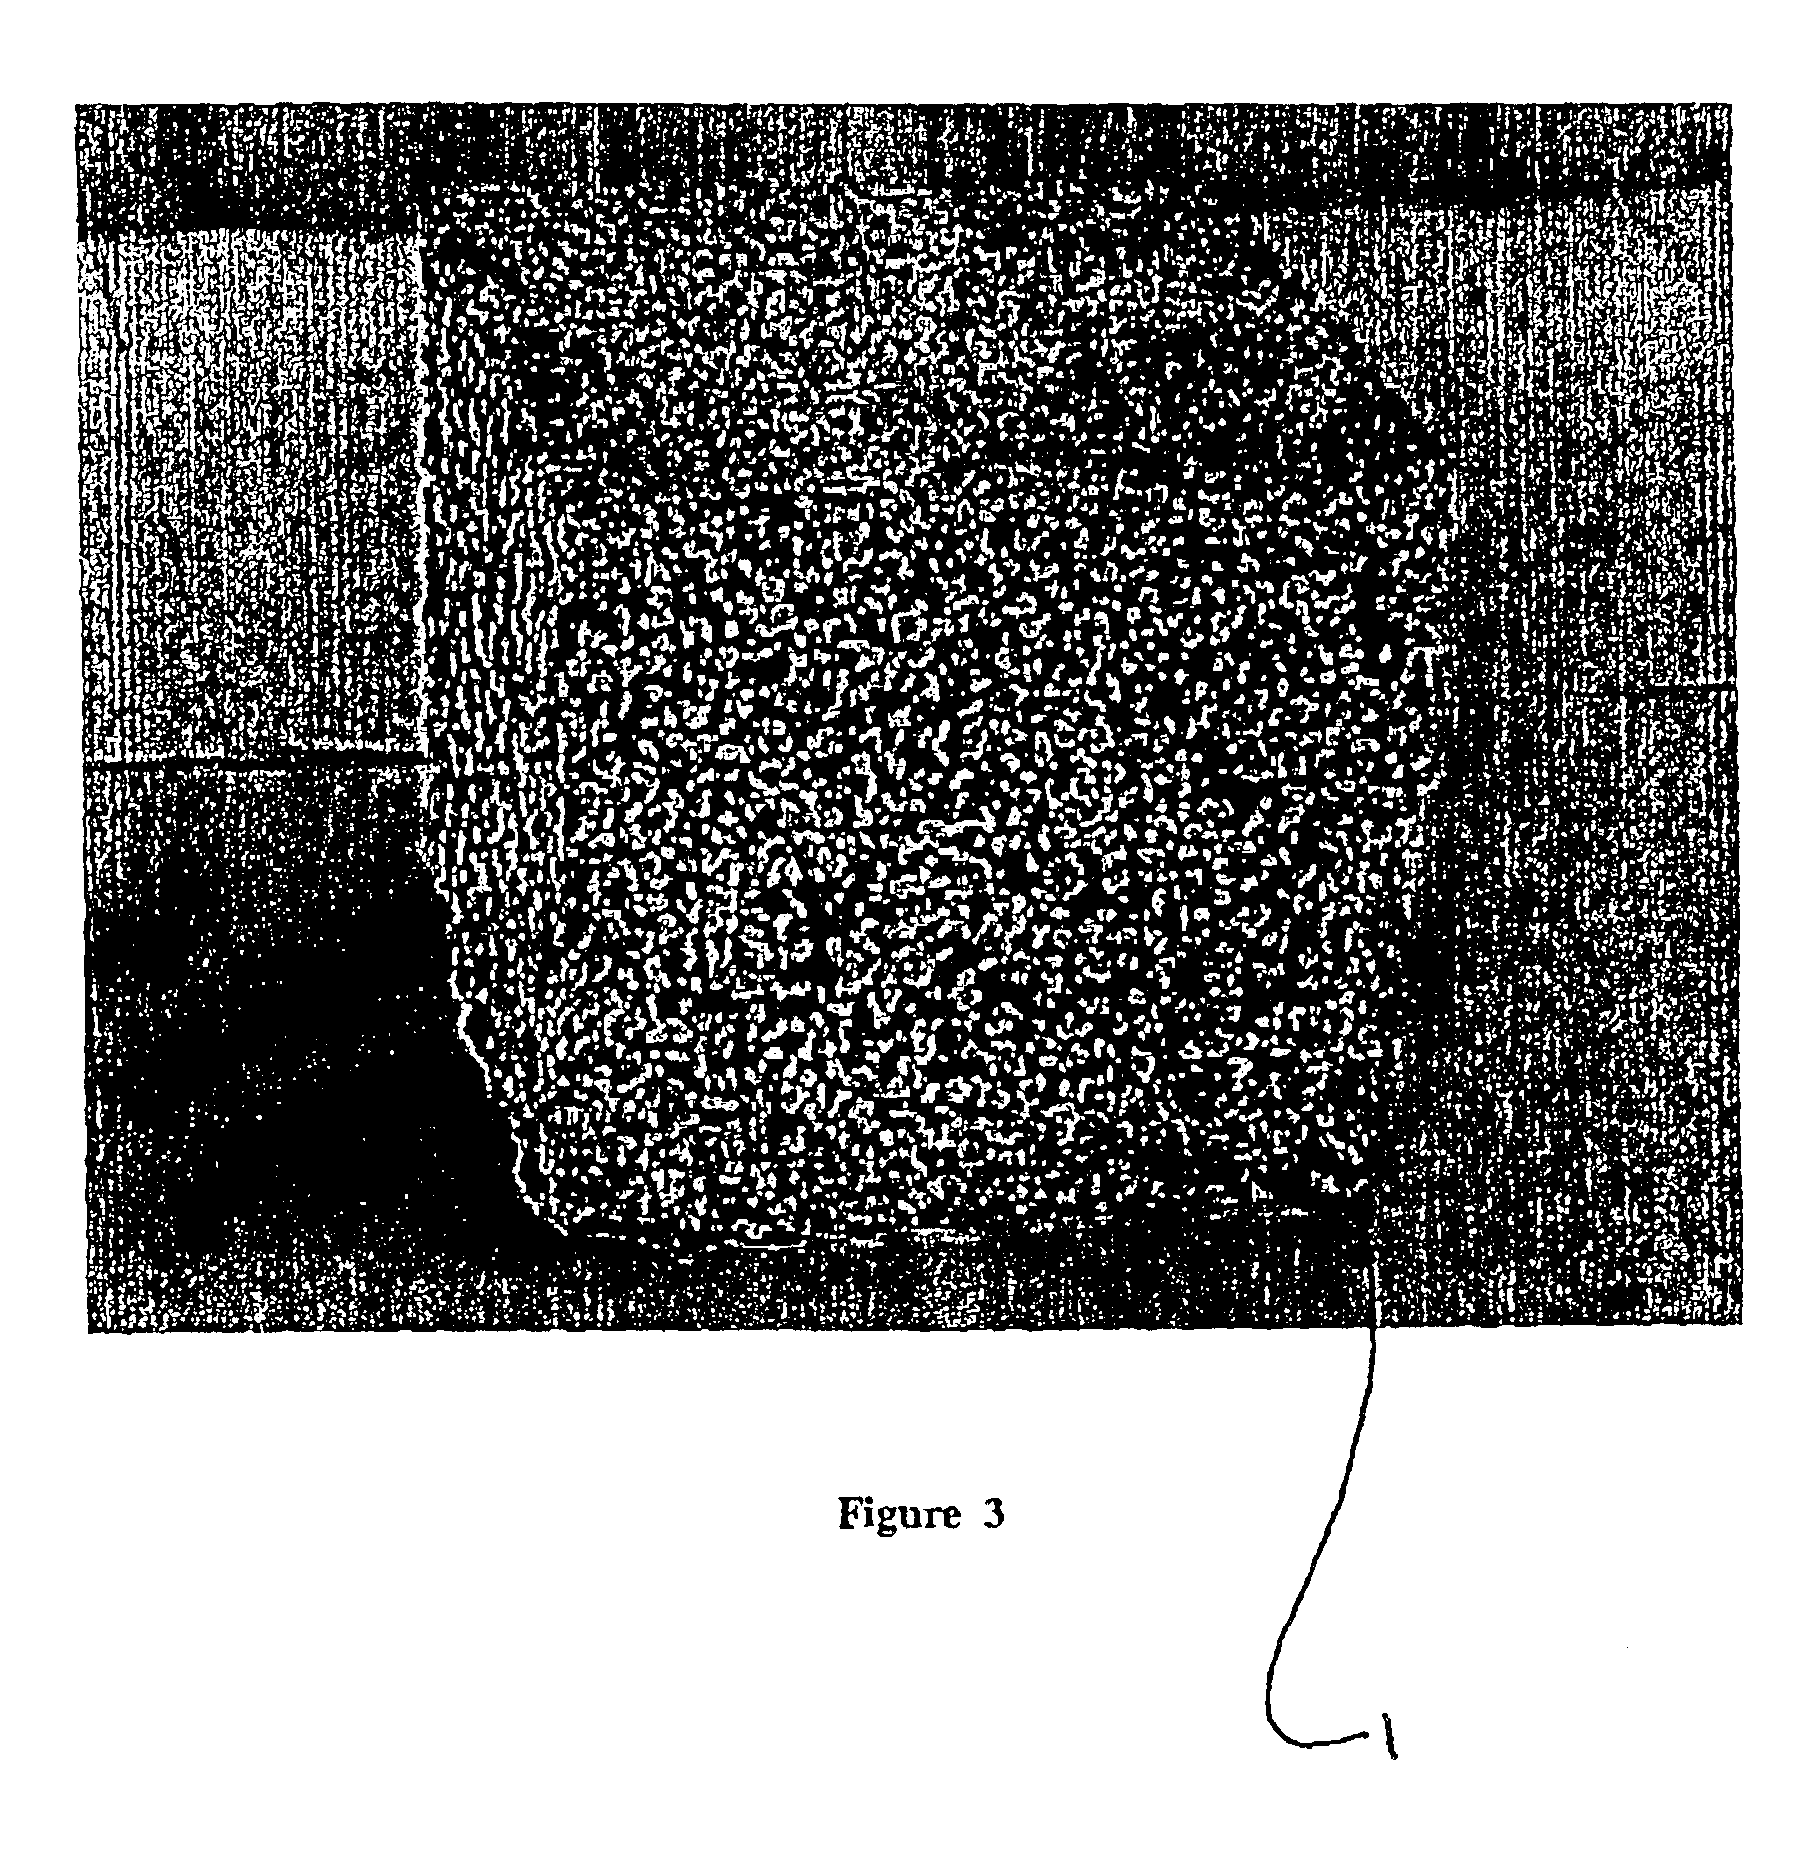 Lightweight and porous construction materials containing rubber